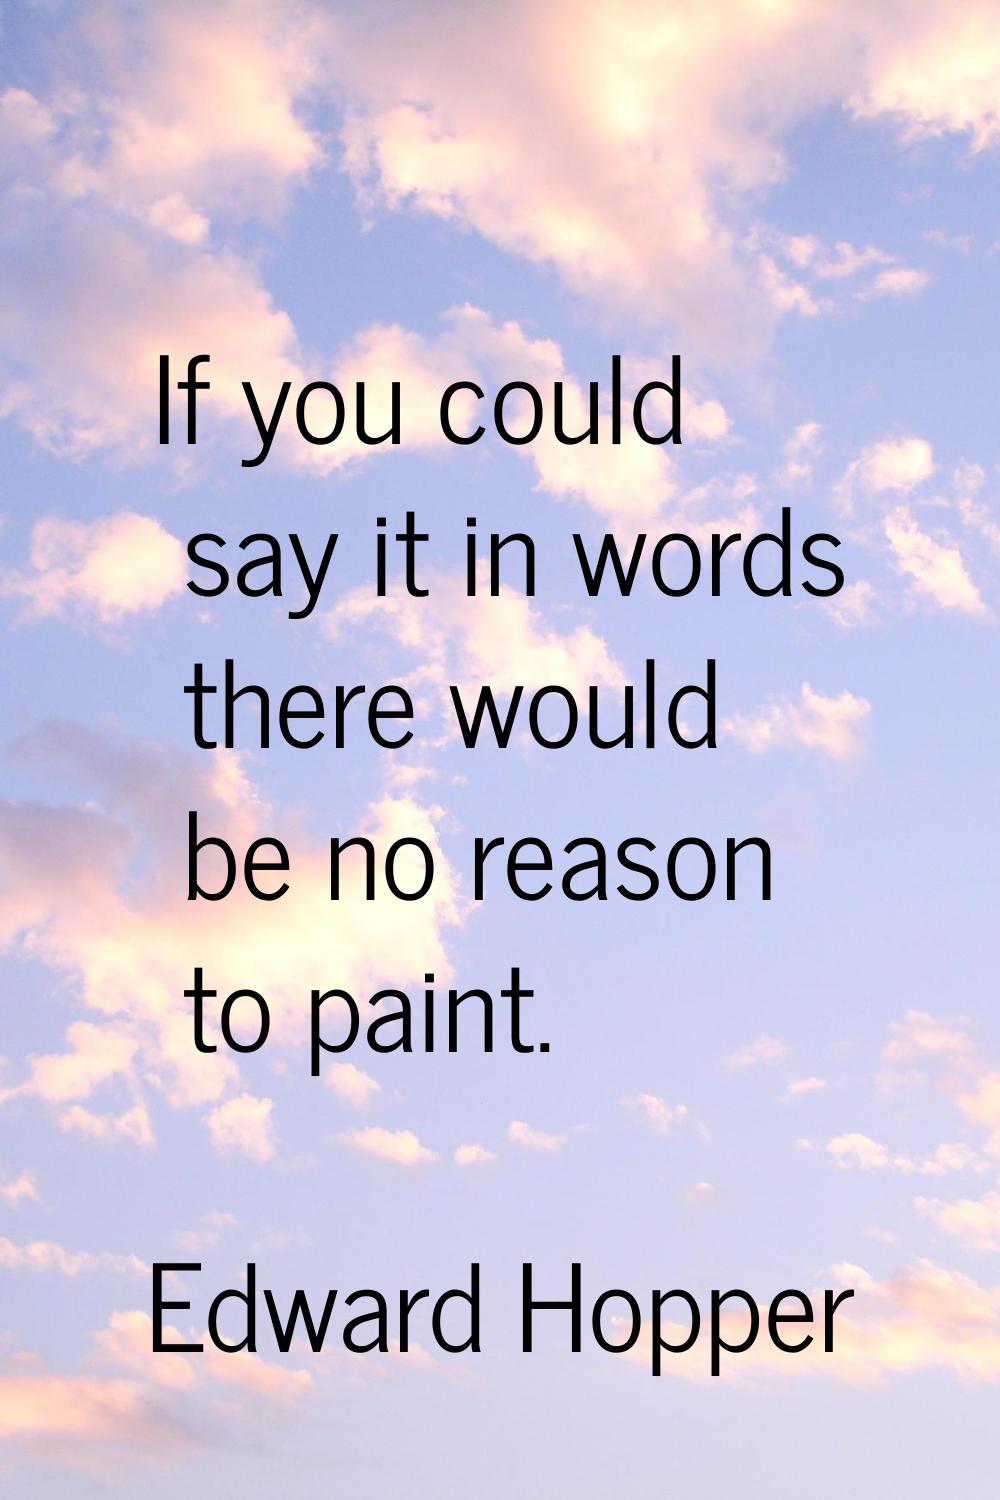 If you could say it in words there would be no reason to paint.